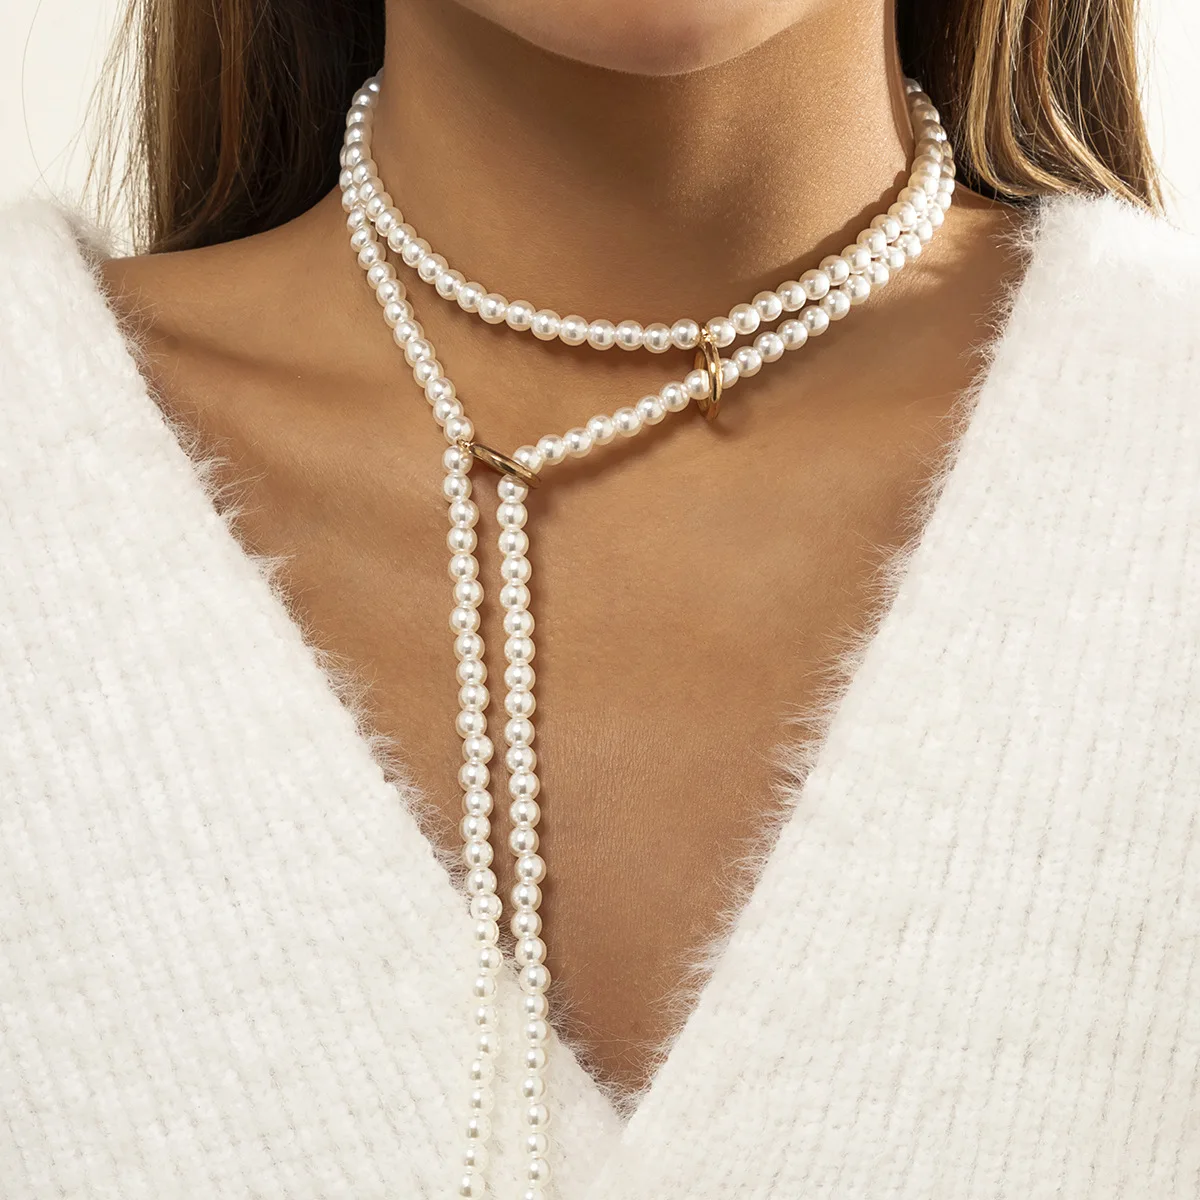 

Boho Multi Layered Imitation Pearl Choker Necklace Long Statement Collar Clavicle Necklaces Women Bridal Wedding Party Jewelry